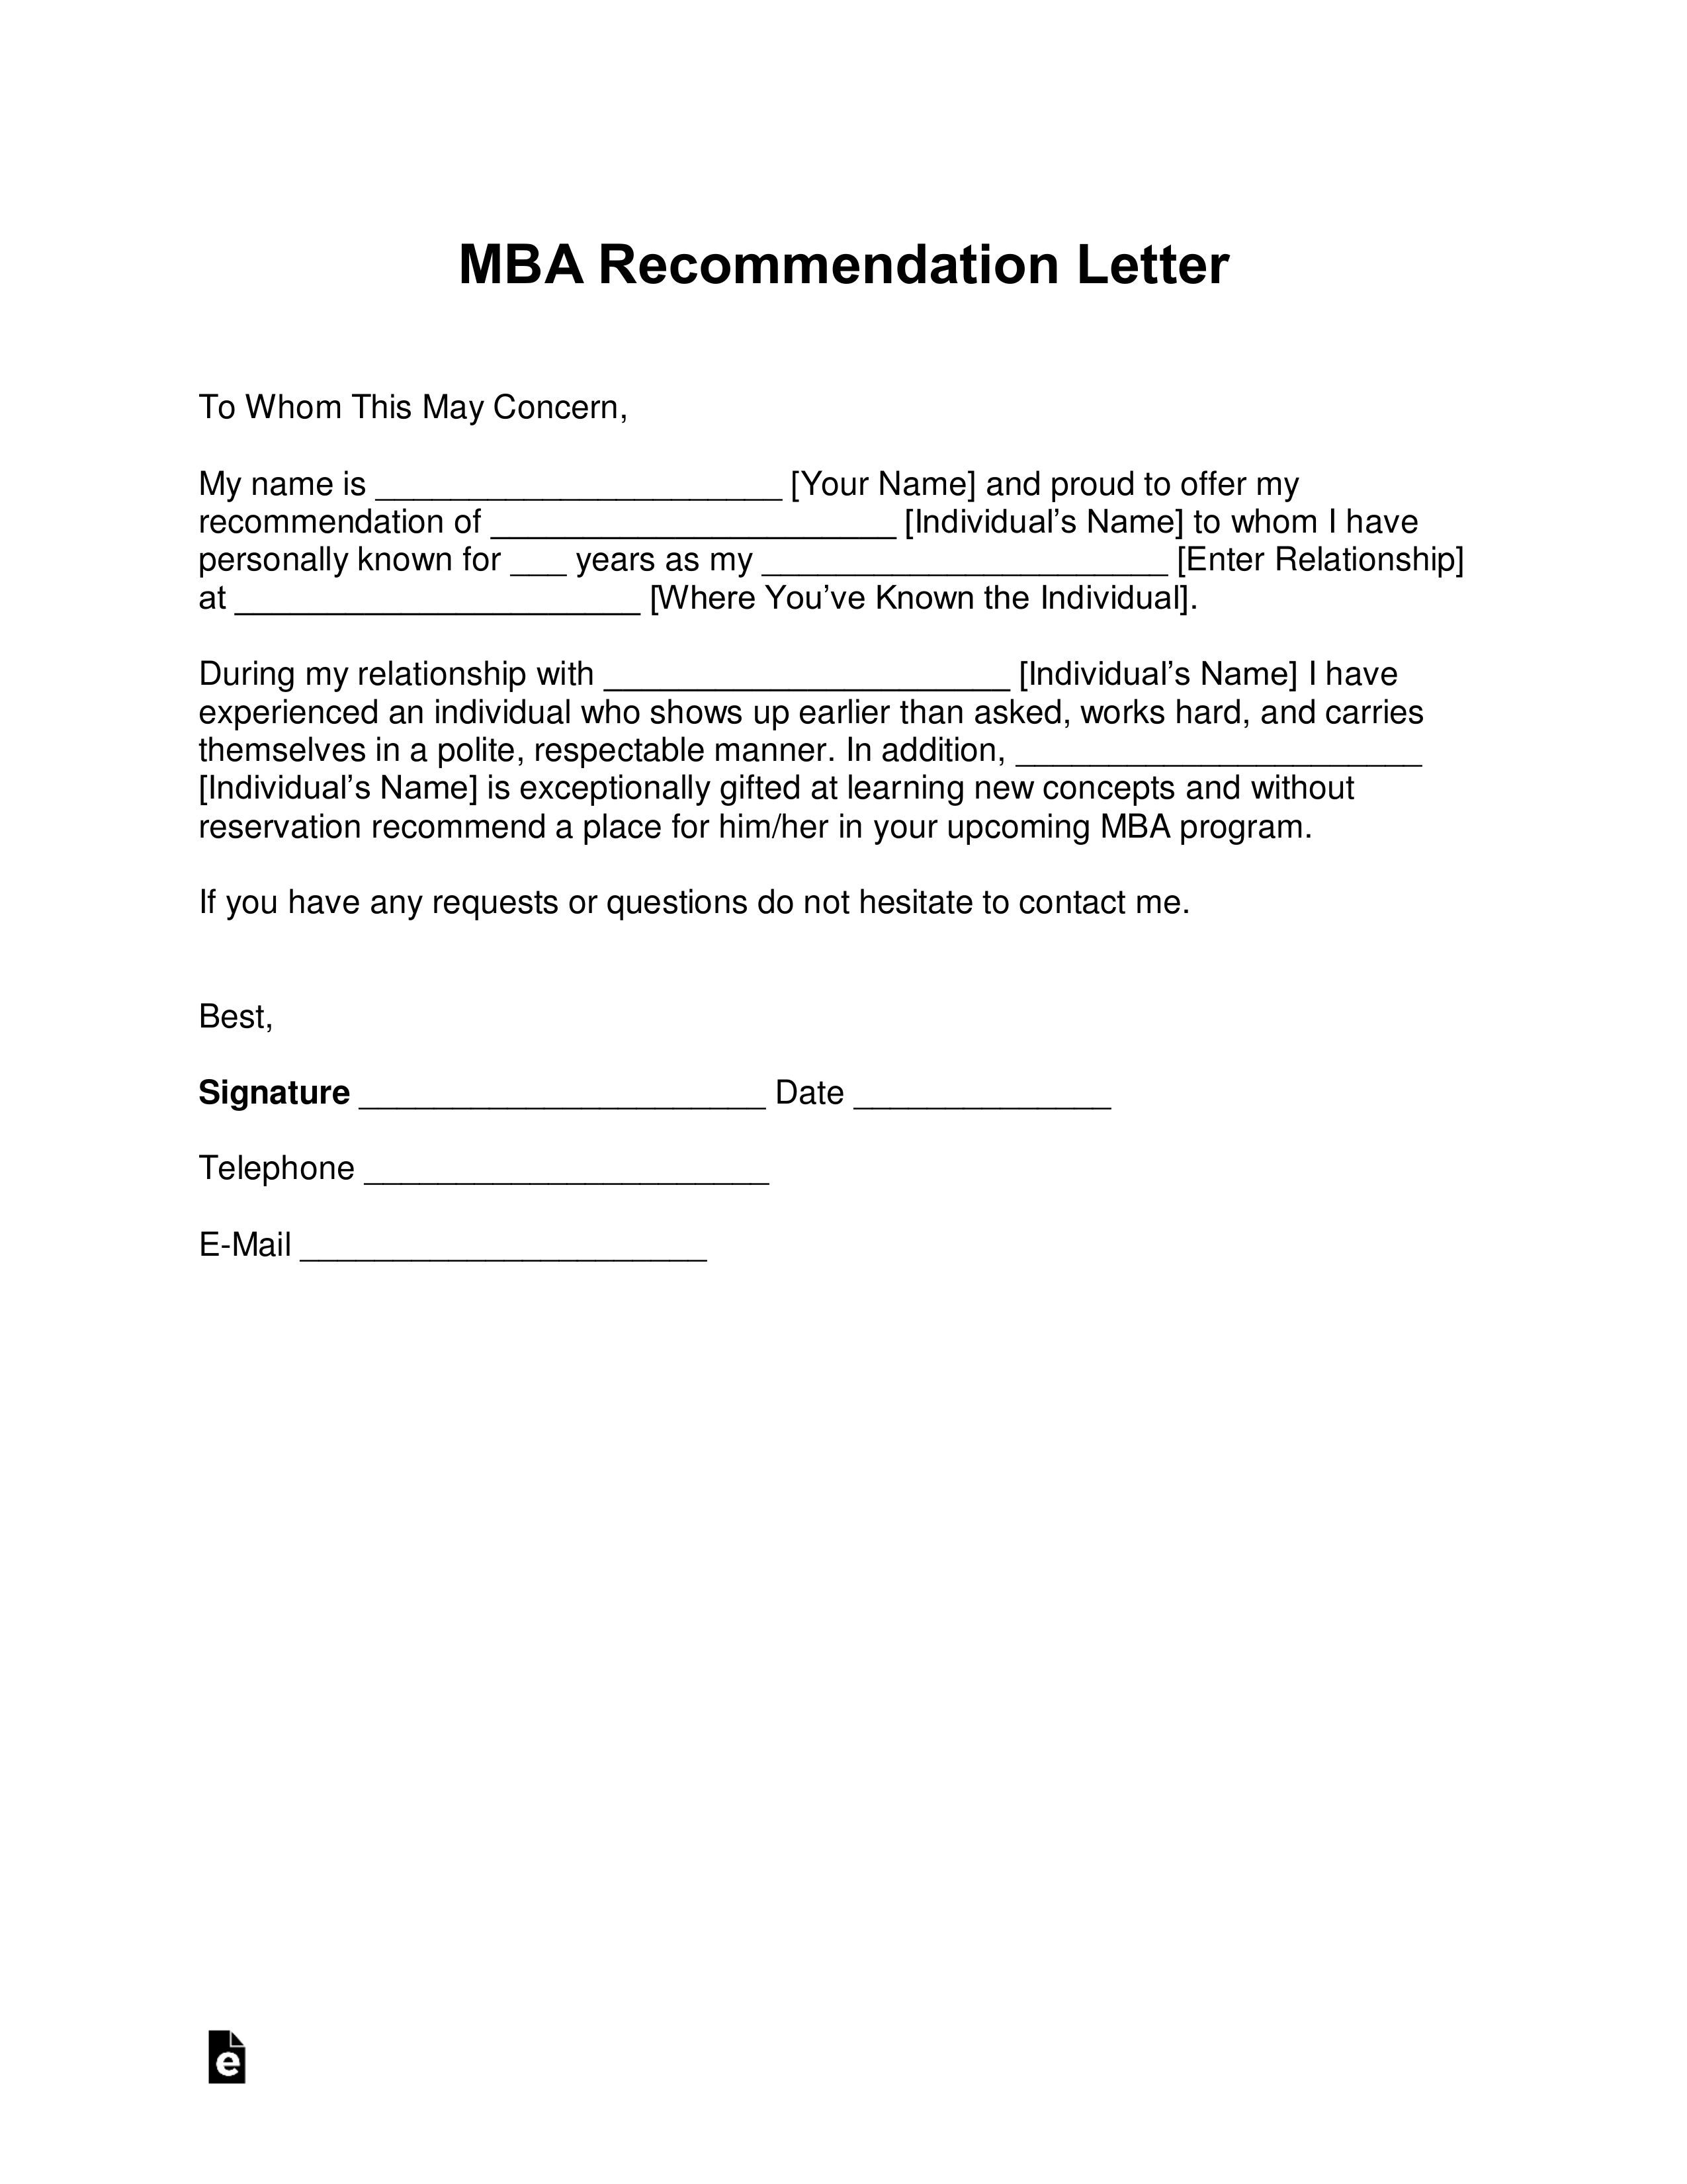 Letter Of Recommendation For Manager from eforms.com